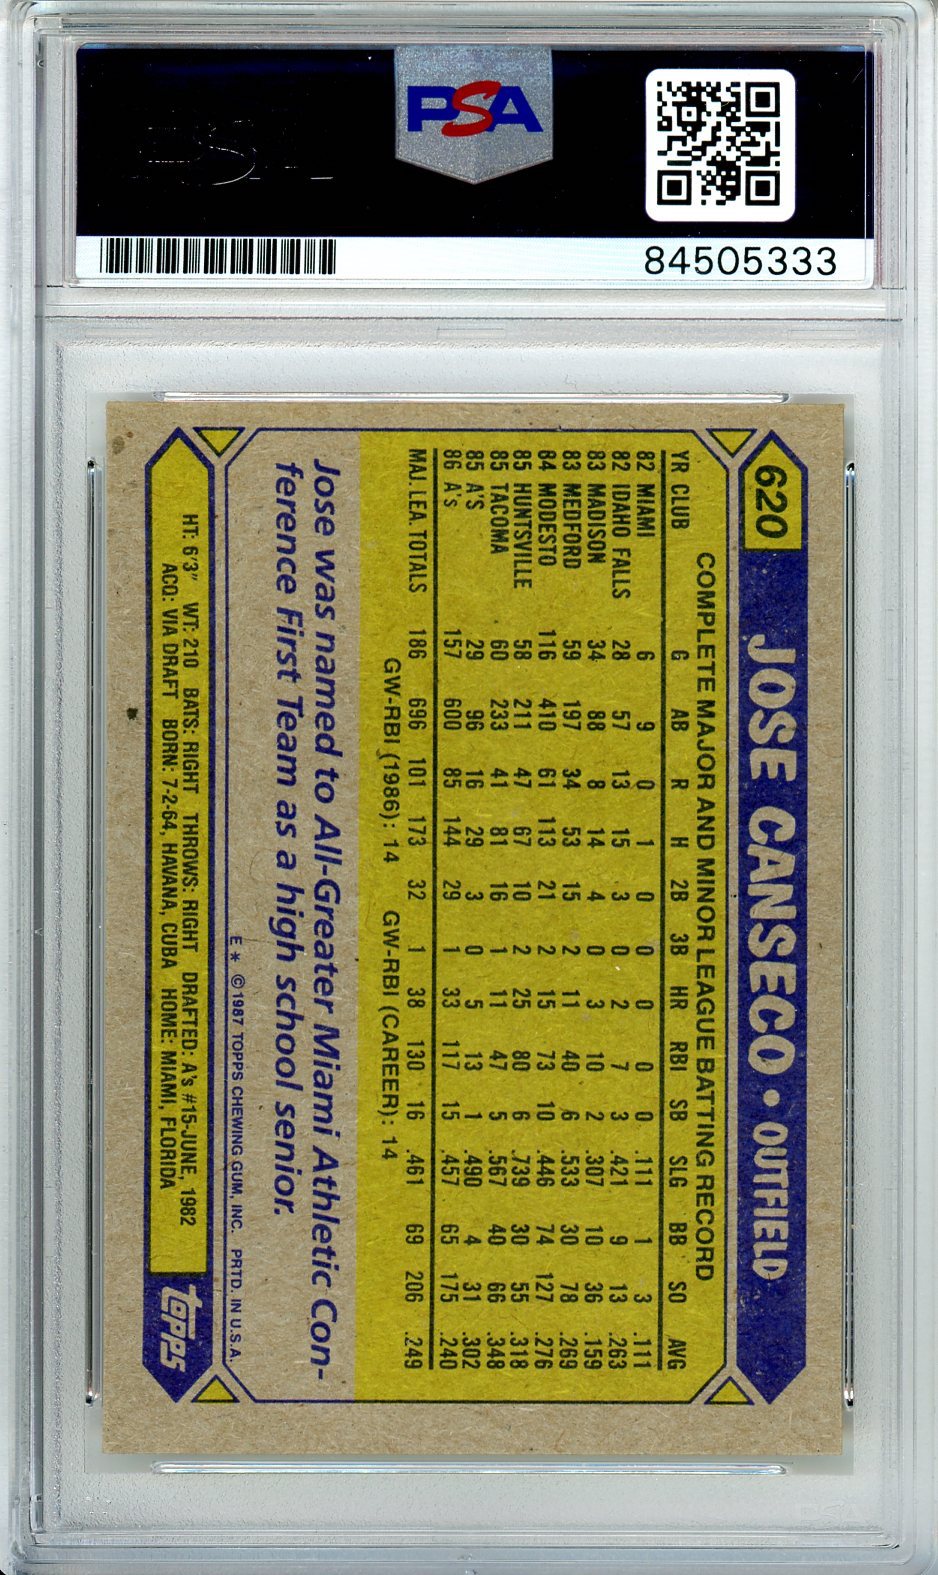 1987 TOPPS JOSE CANSECO AUTO RC ROOKIE #620 PSA DNA (333)